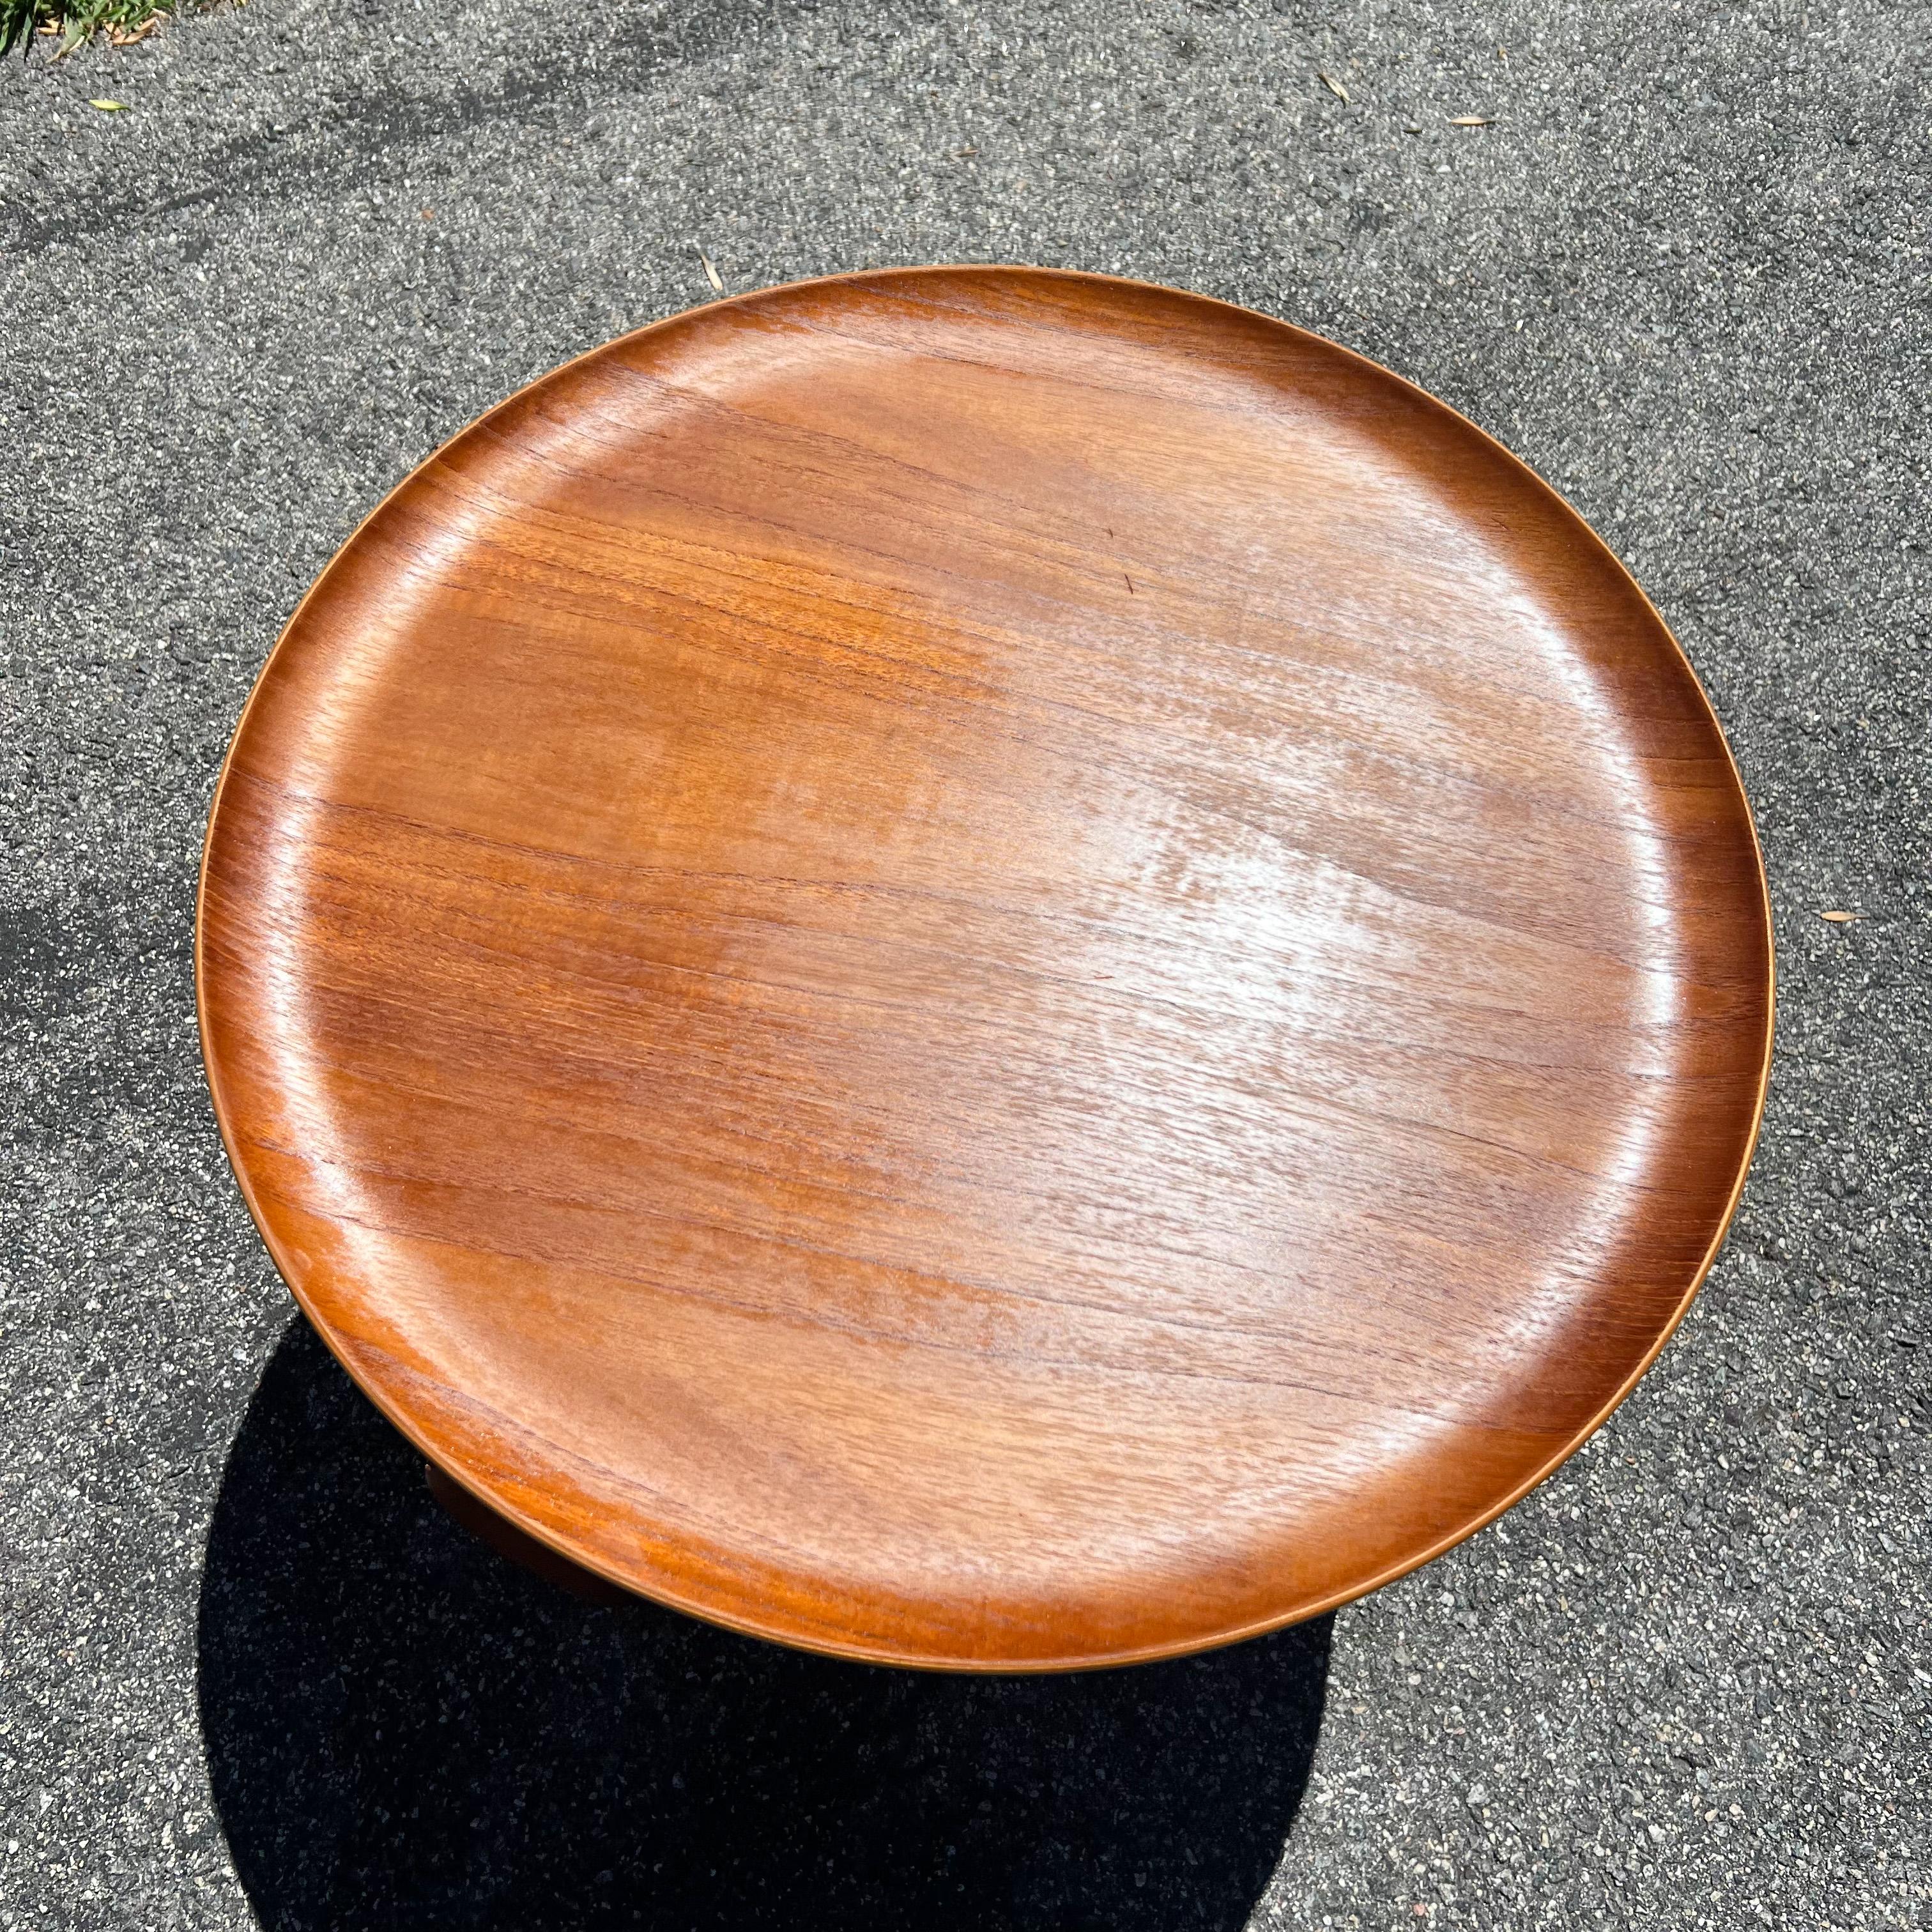 Mid-Century Modern hard to find collapsible danish teak side table designed by Illums Bolighus. Stamped on the base. Minimal wear/scuffing/scratching to the teak finish.